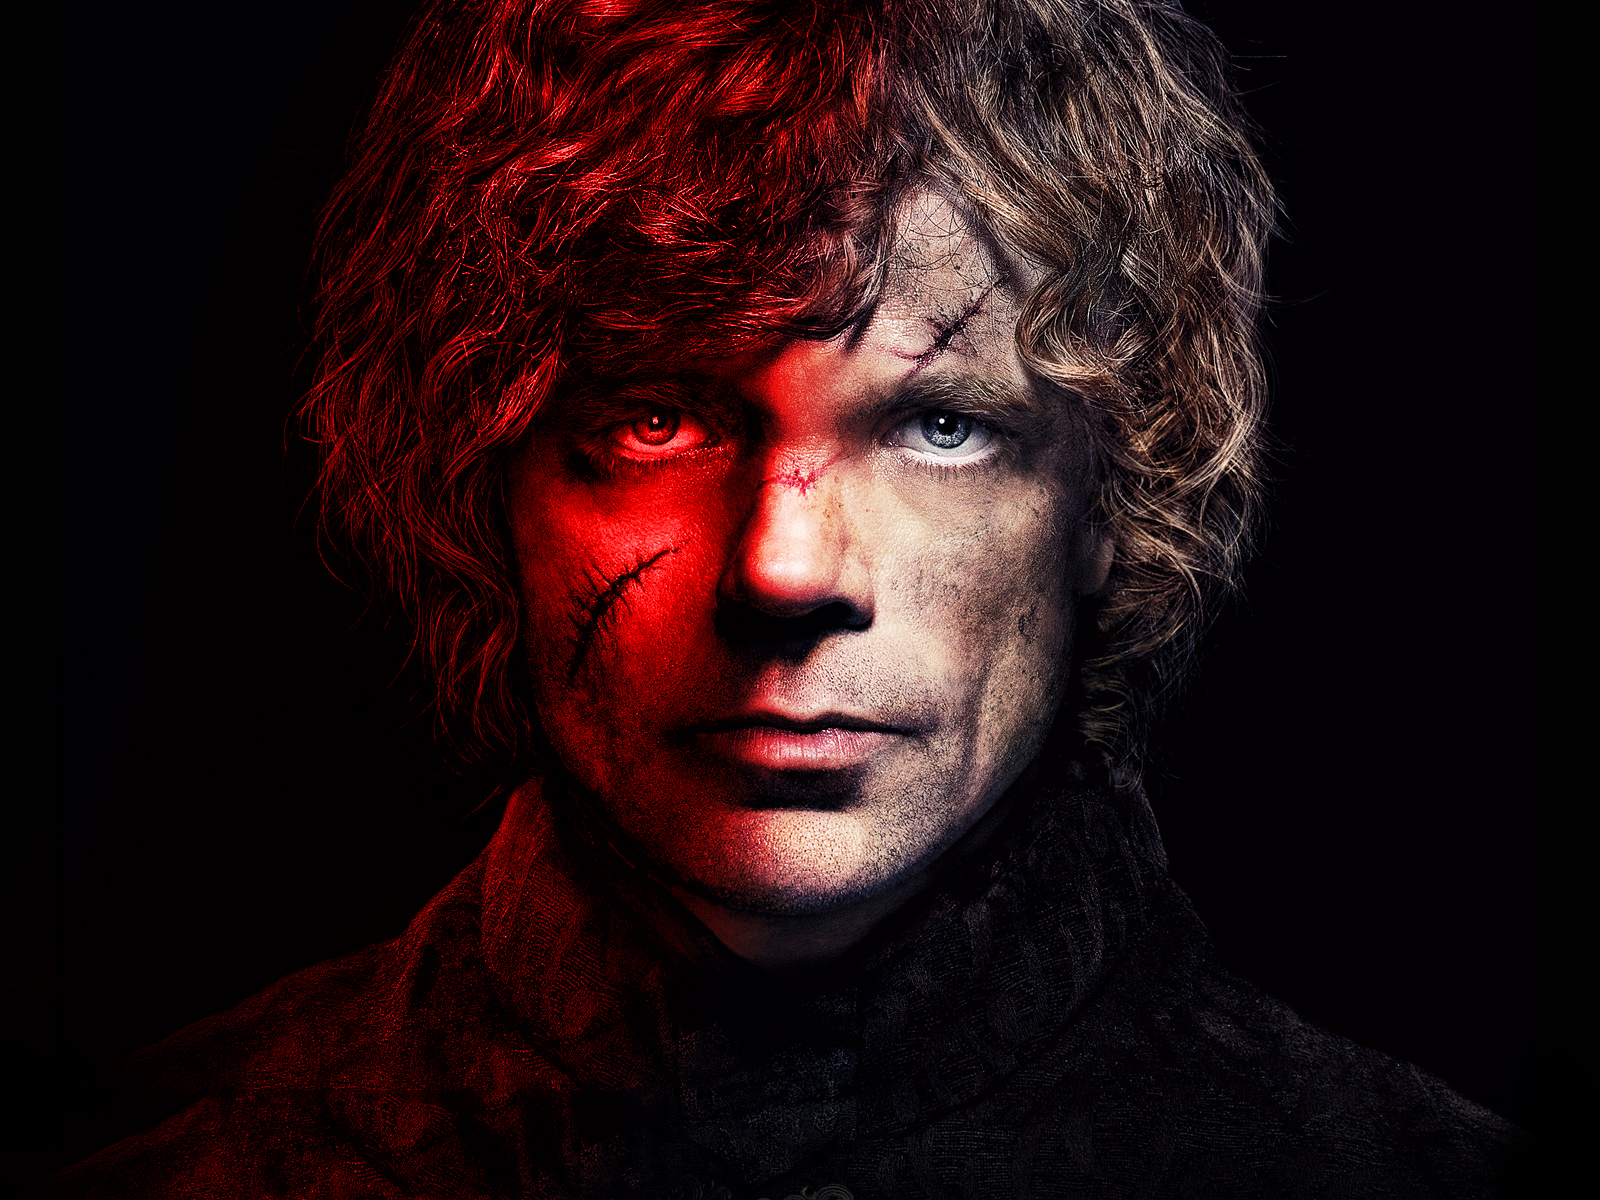 tyrion lannister, game of thrones, tv show, peter dinklage